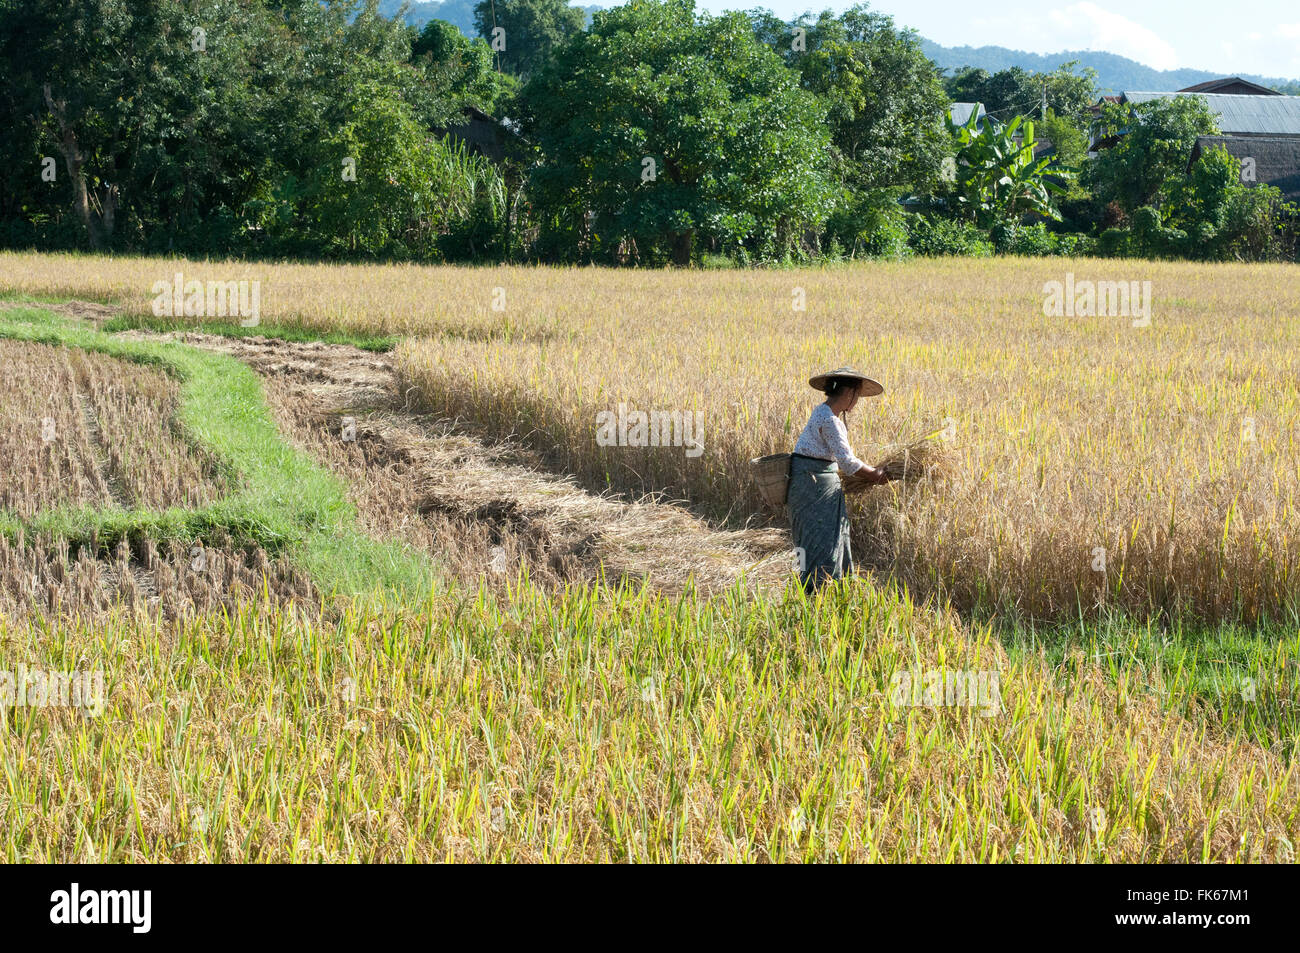 Woman in bamboo hat, harvesting rice, bamboo basket on her back, rural Hsipaw, Shan state, Myanmar (Burma), Asia Stock Photo